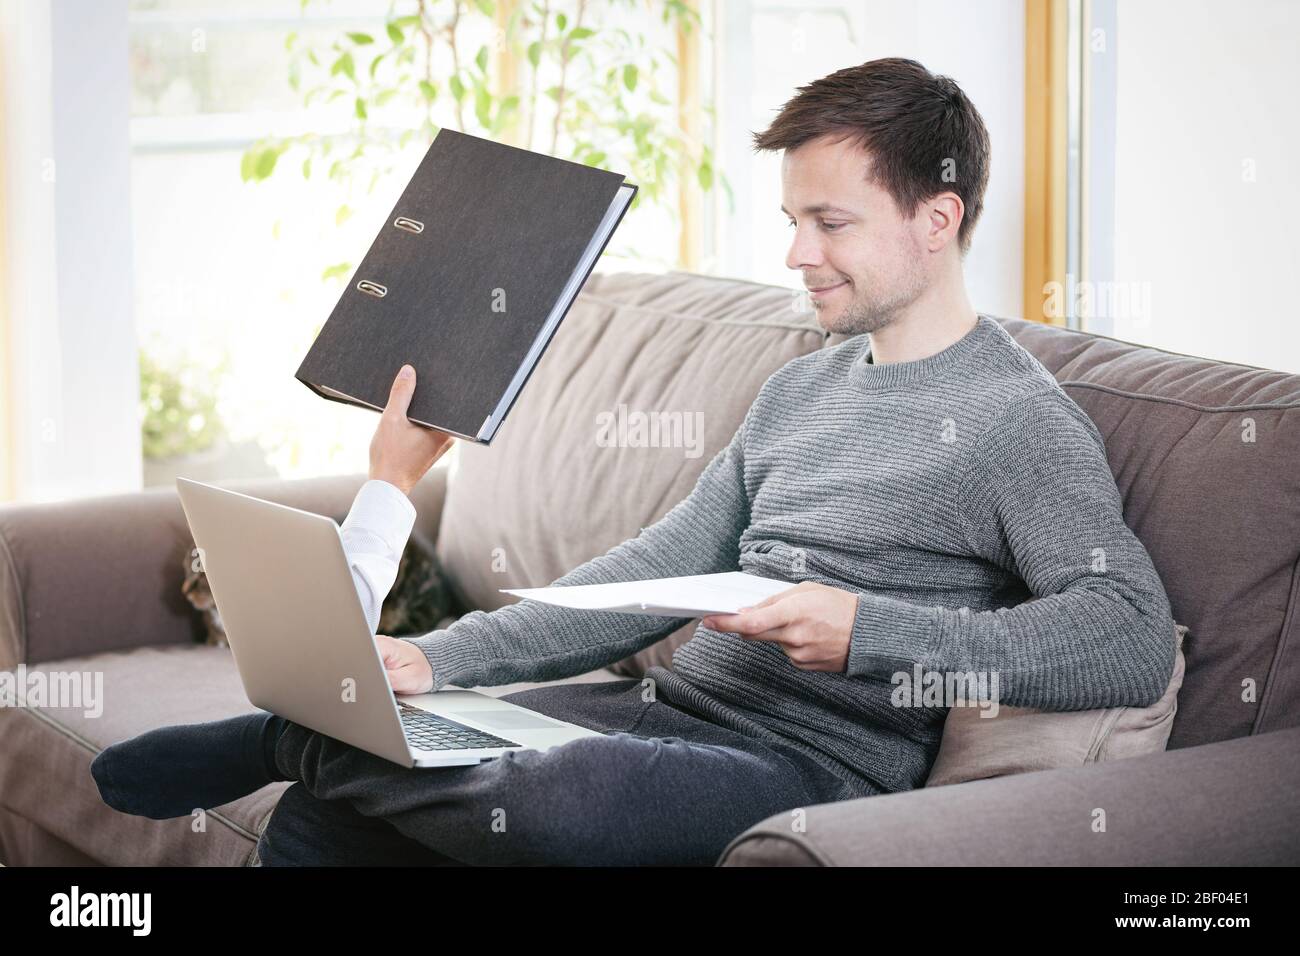 Working from home - man gets files handed to him through the laptop screen Stock Photo